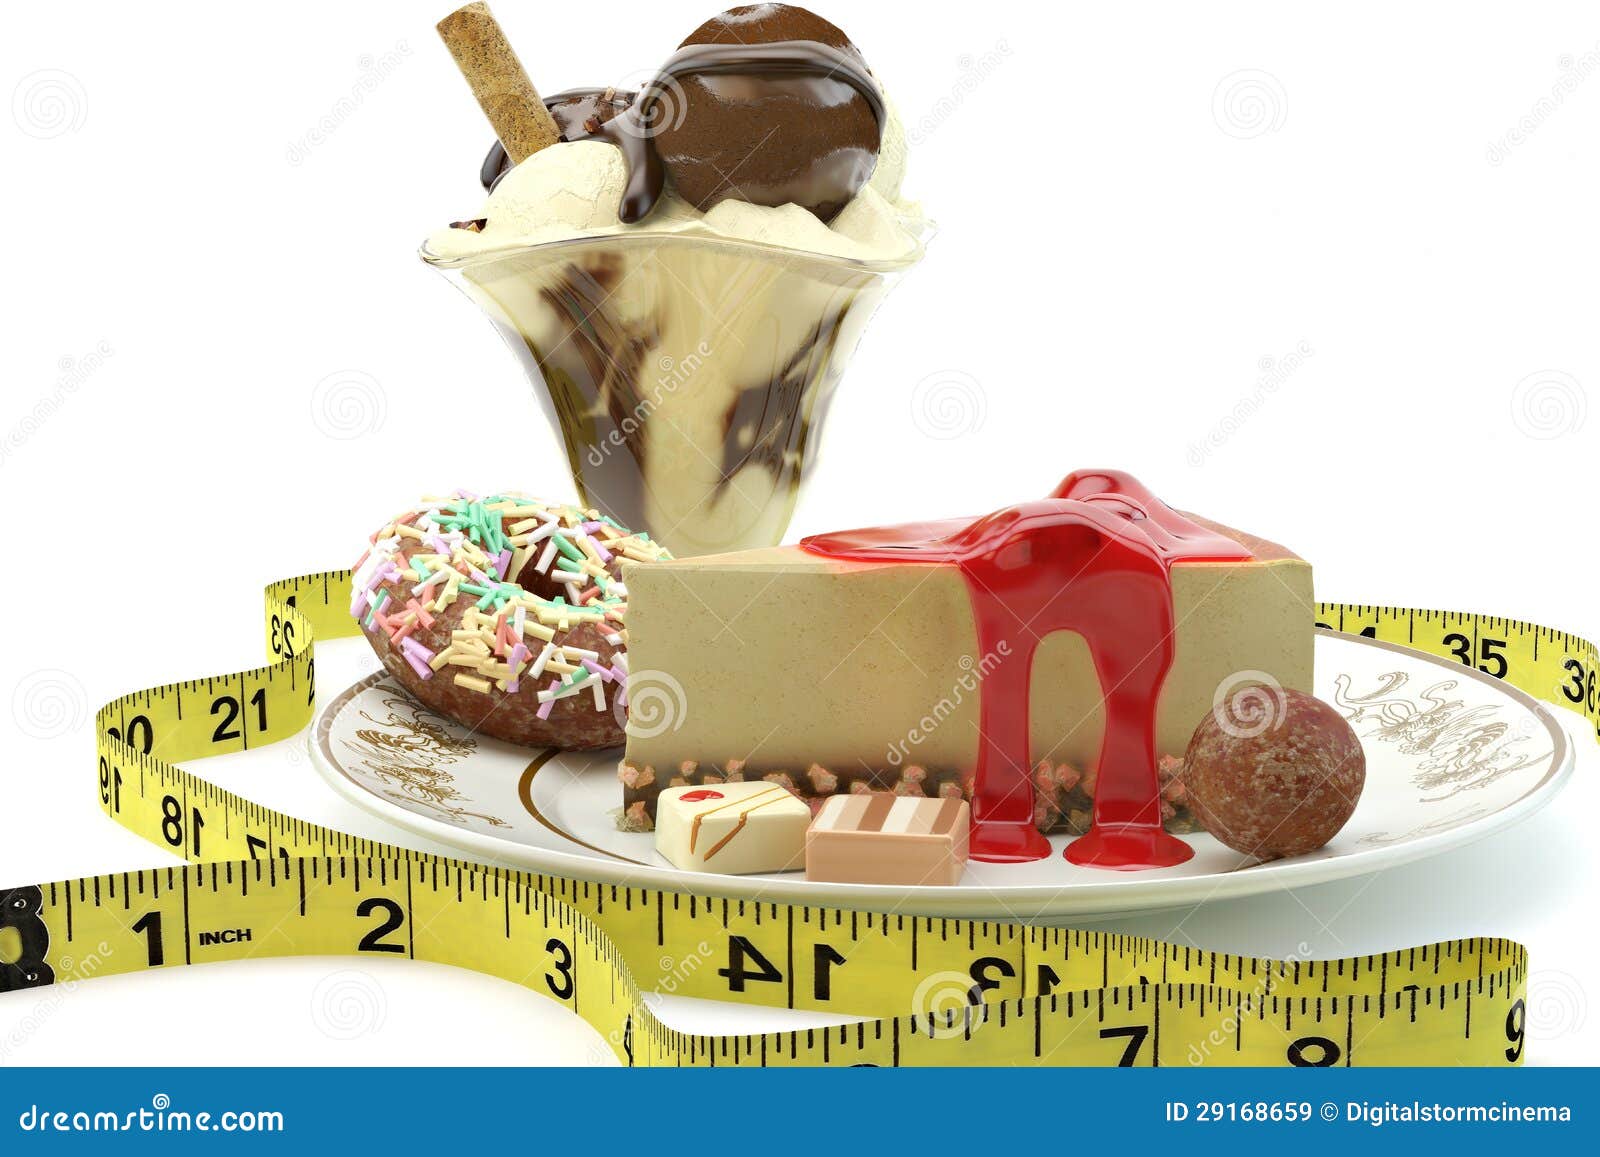 rich calorie desserts surrounded by a measuring tape